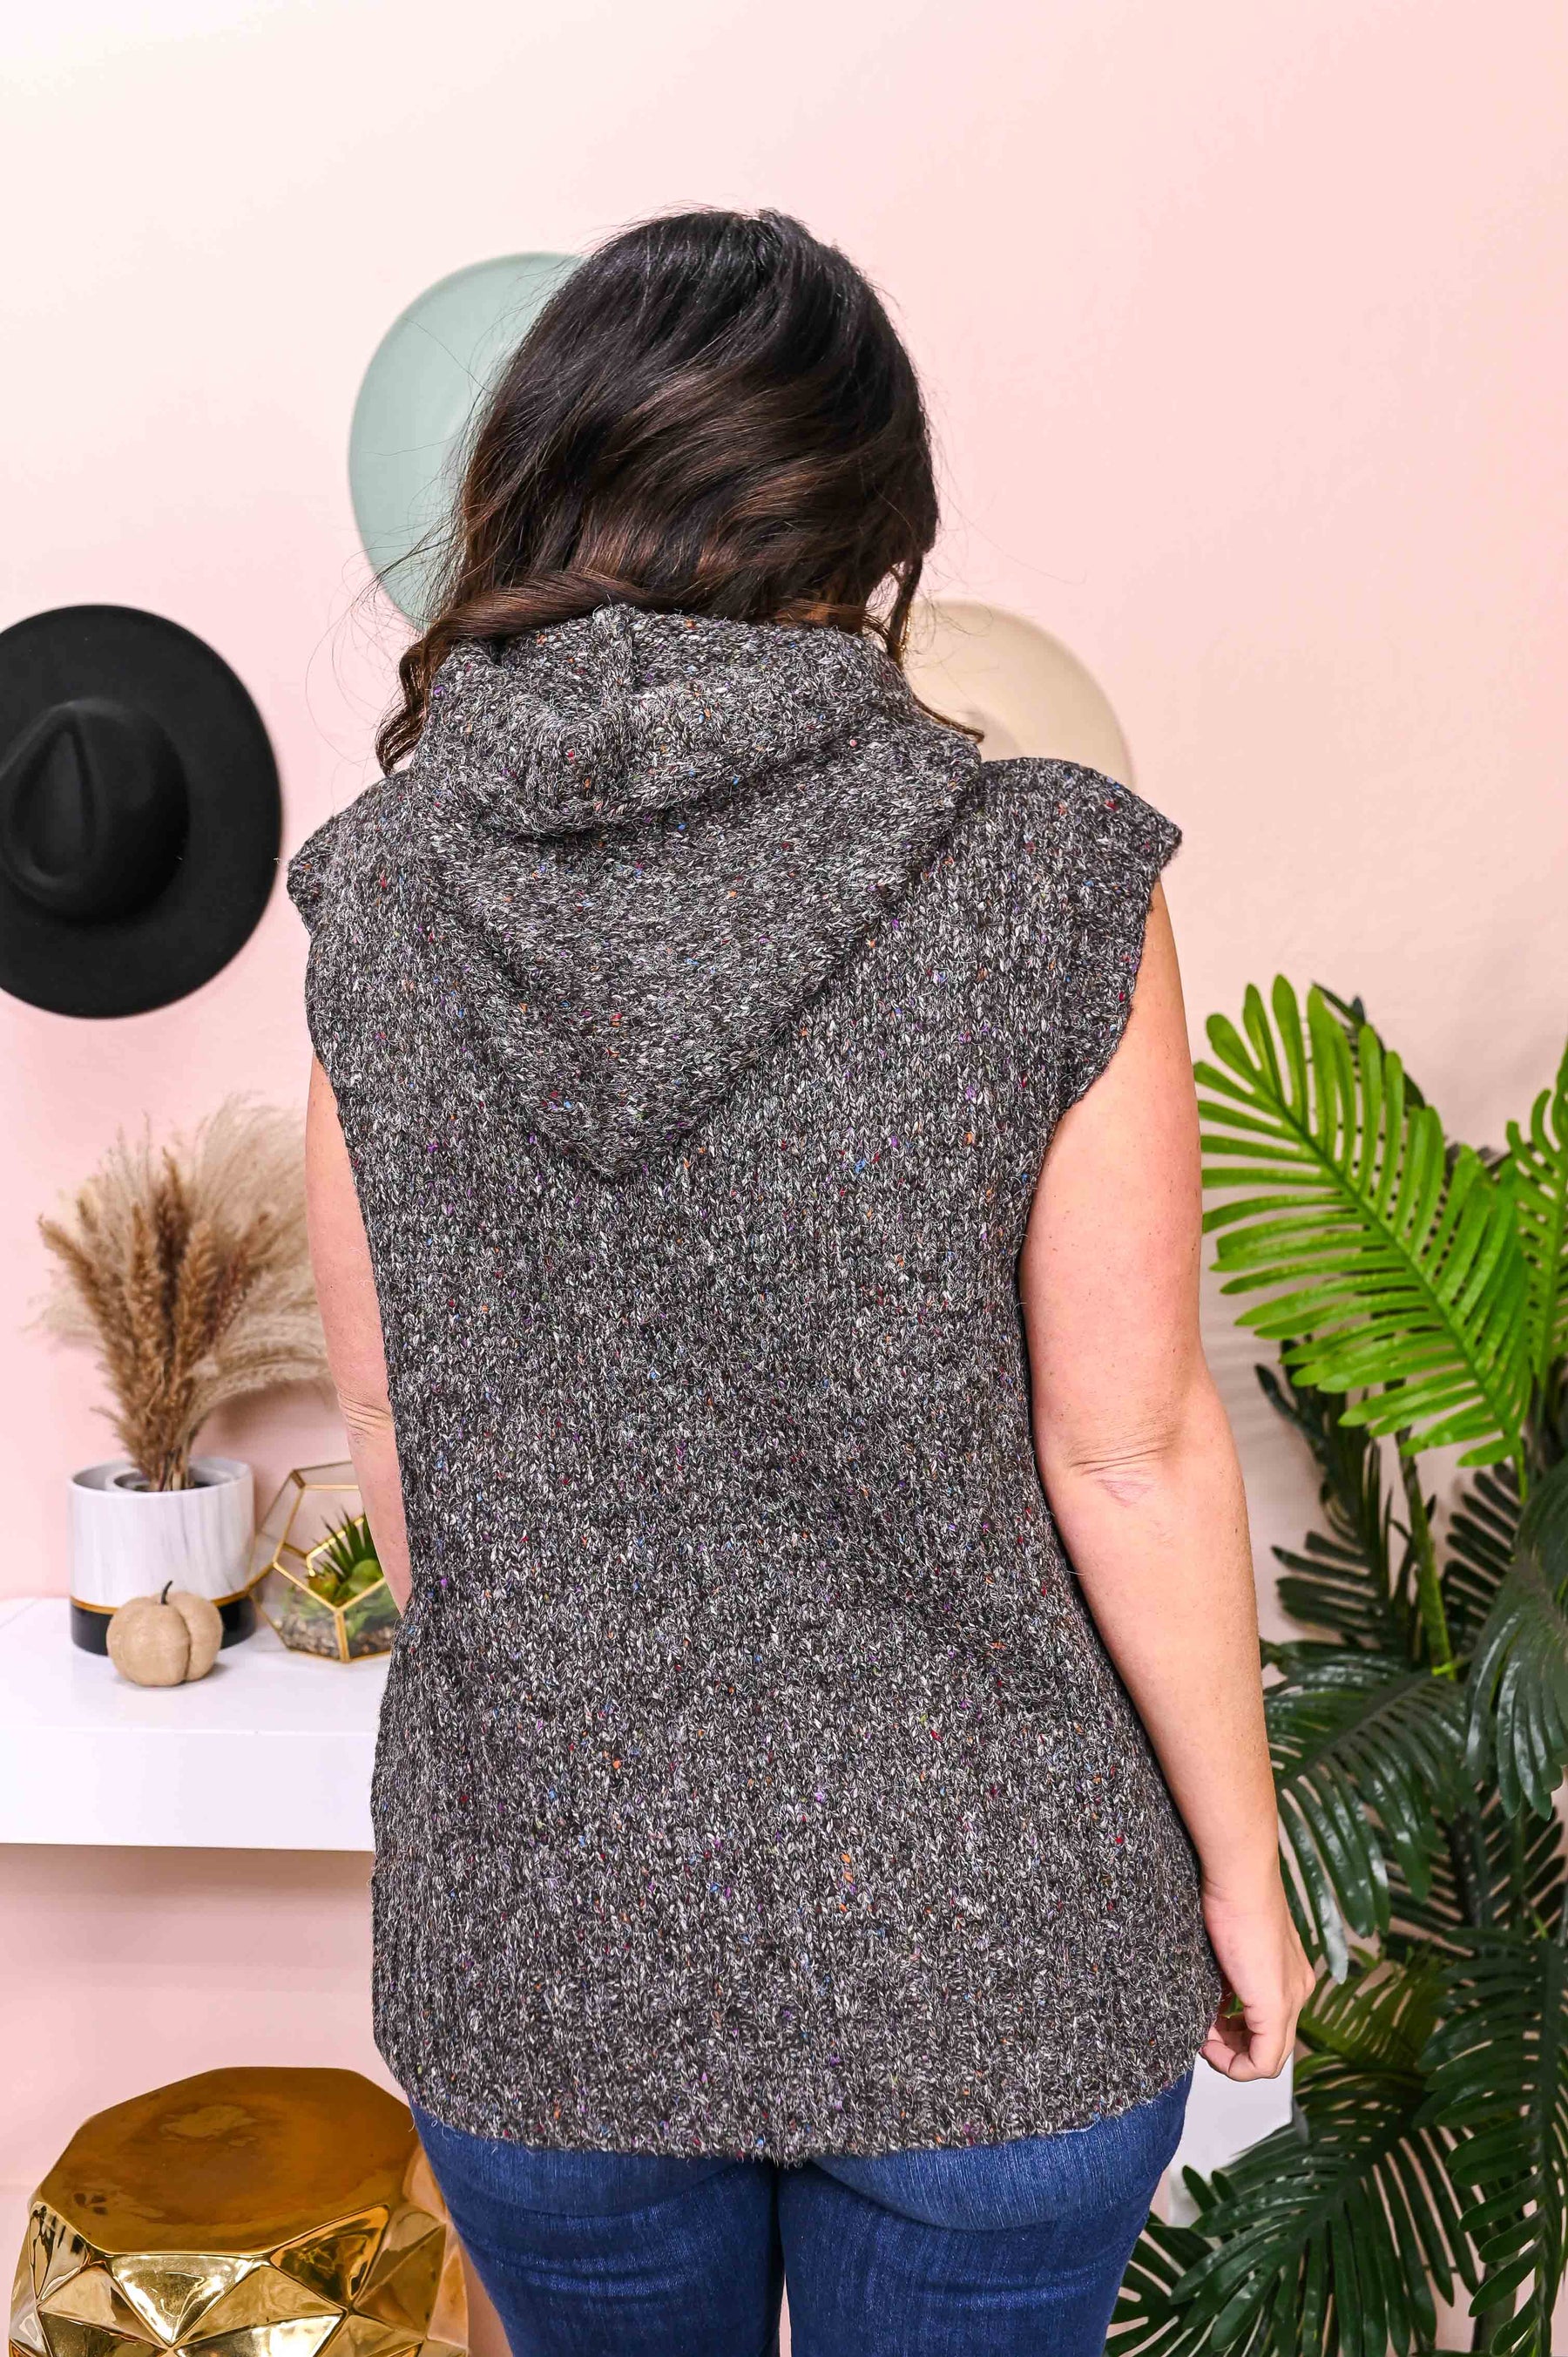 In The Mood For Comfort Charcoal Gray/Multi Color Knitted Hooded Top - T5534CG